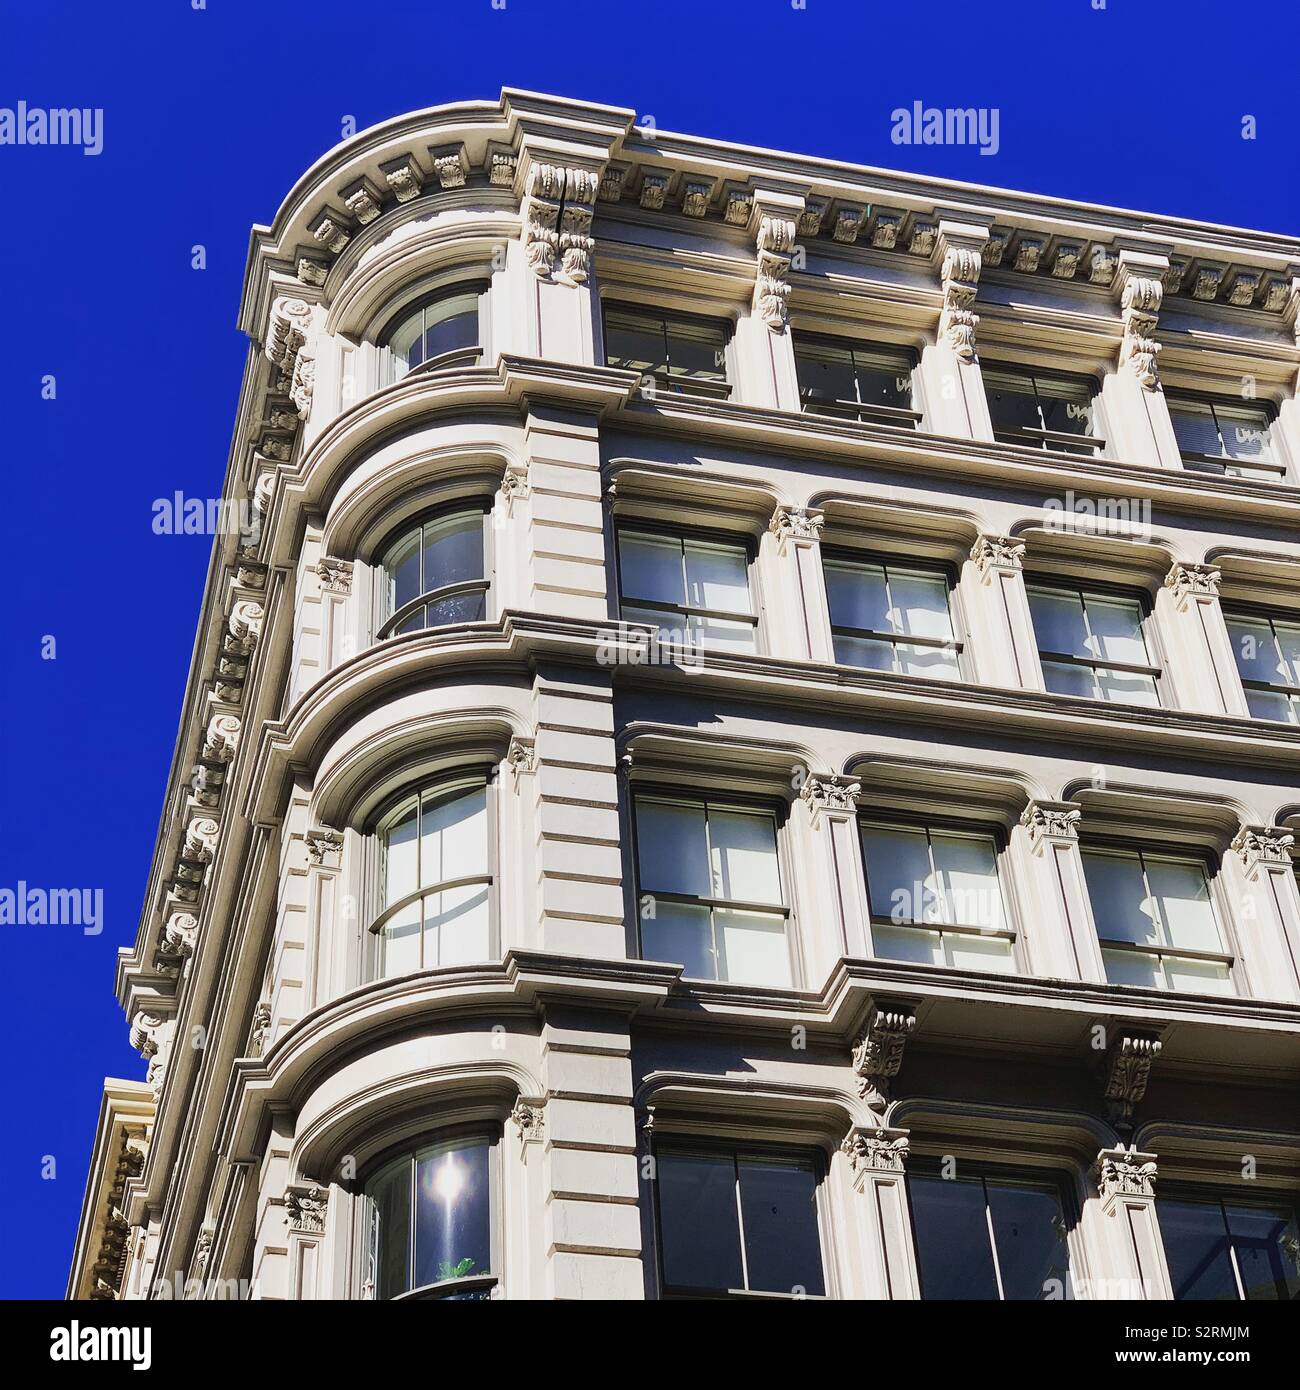 Corner of a cast iron building in SoHo, New York, New York, United States Stock Photo